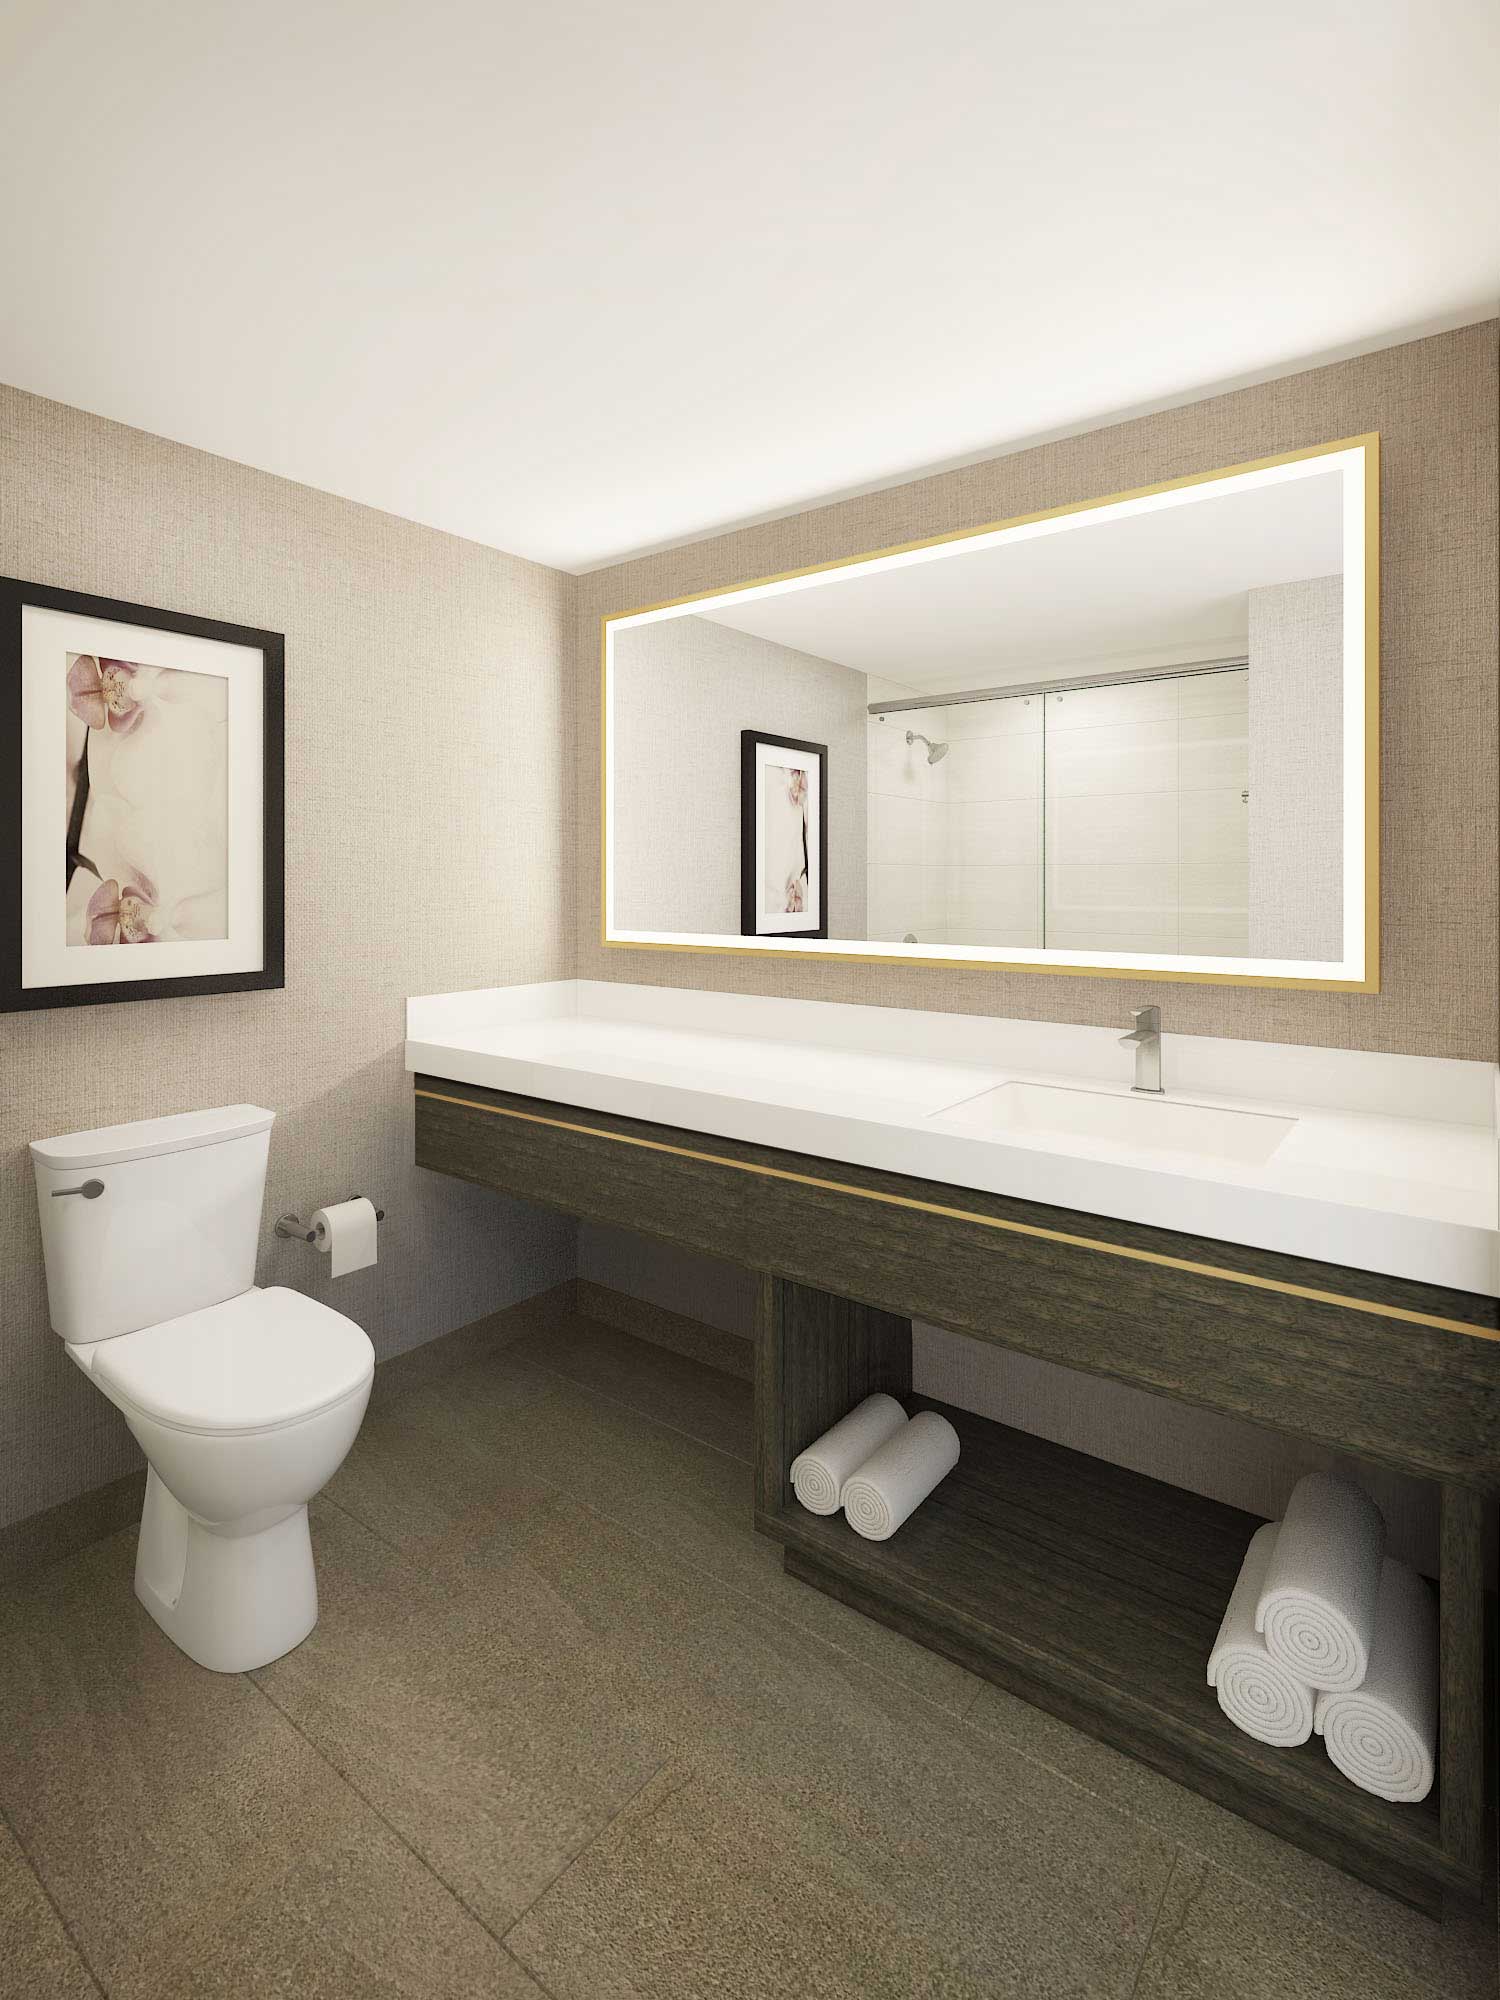 Each guestroom will offer a distinguished guest experience, which continues into the bathrooms, where new vanities, lighted mirrors, flooring, and showers create a spa-like setting.